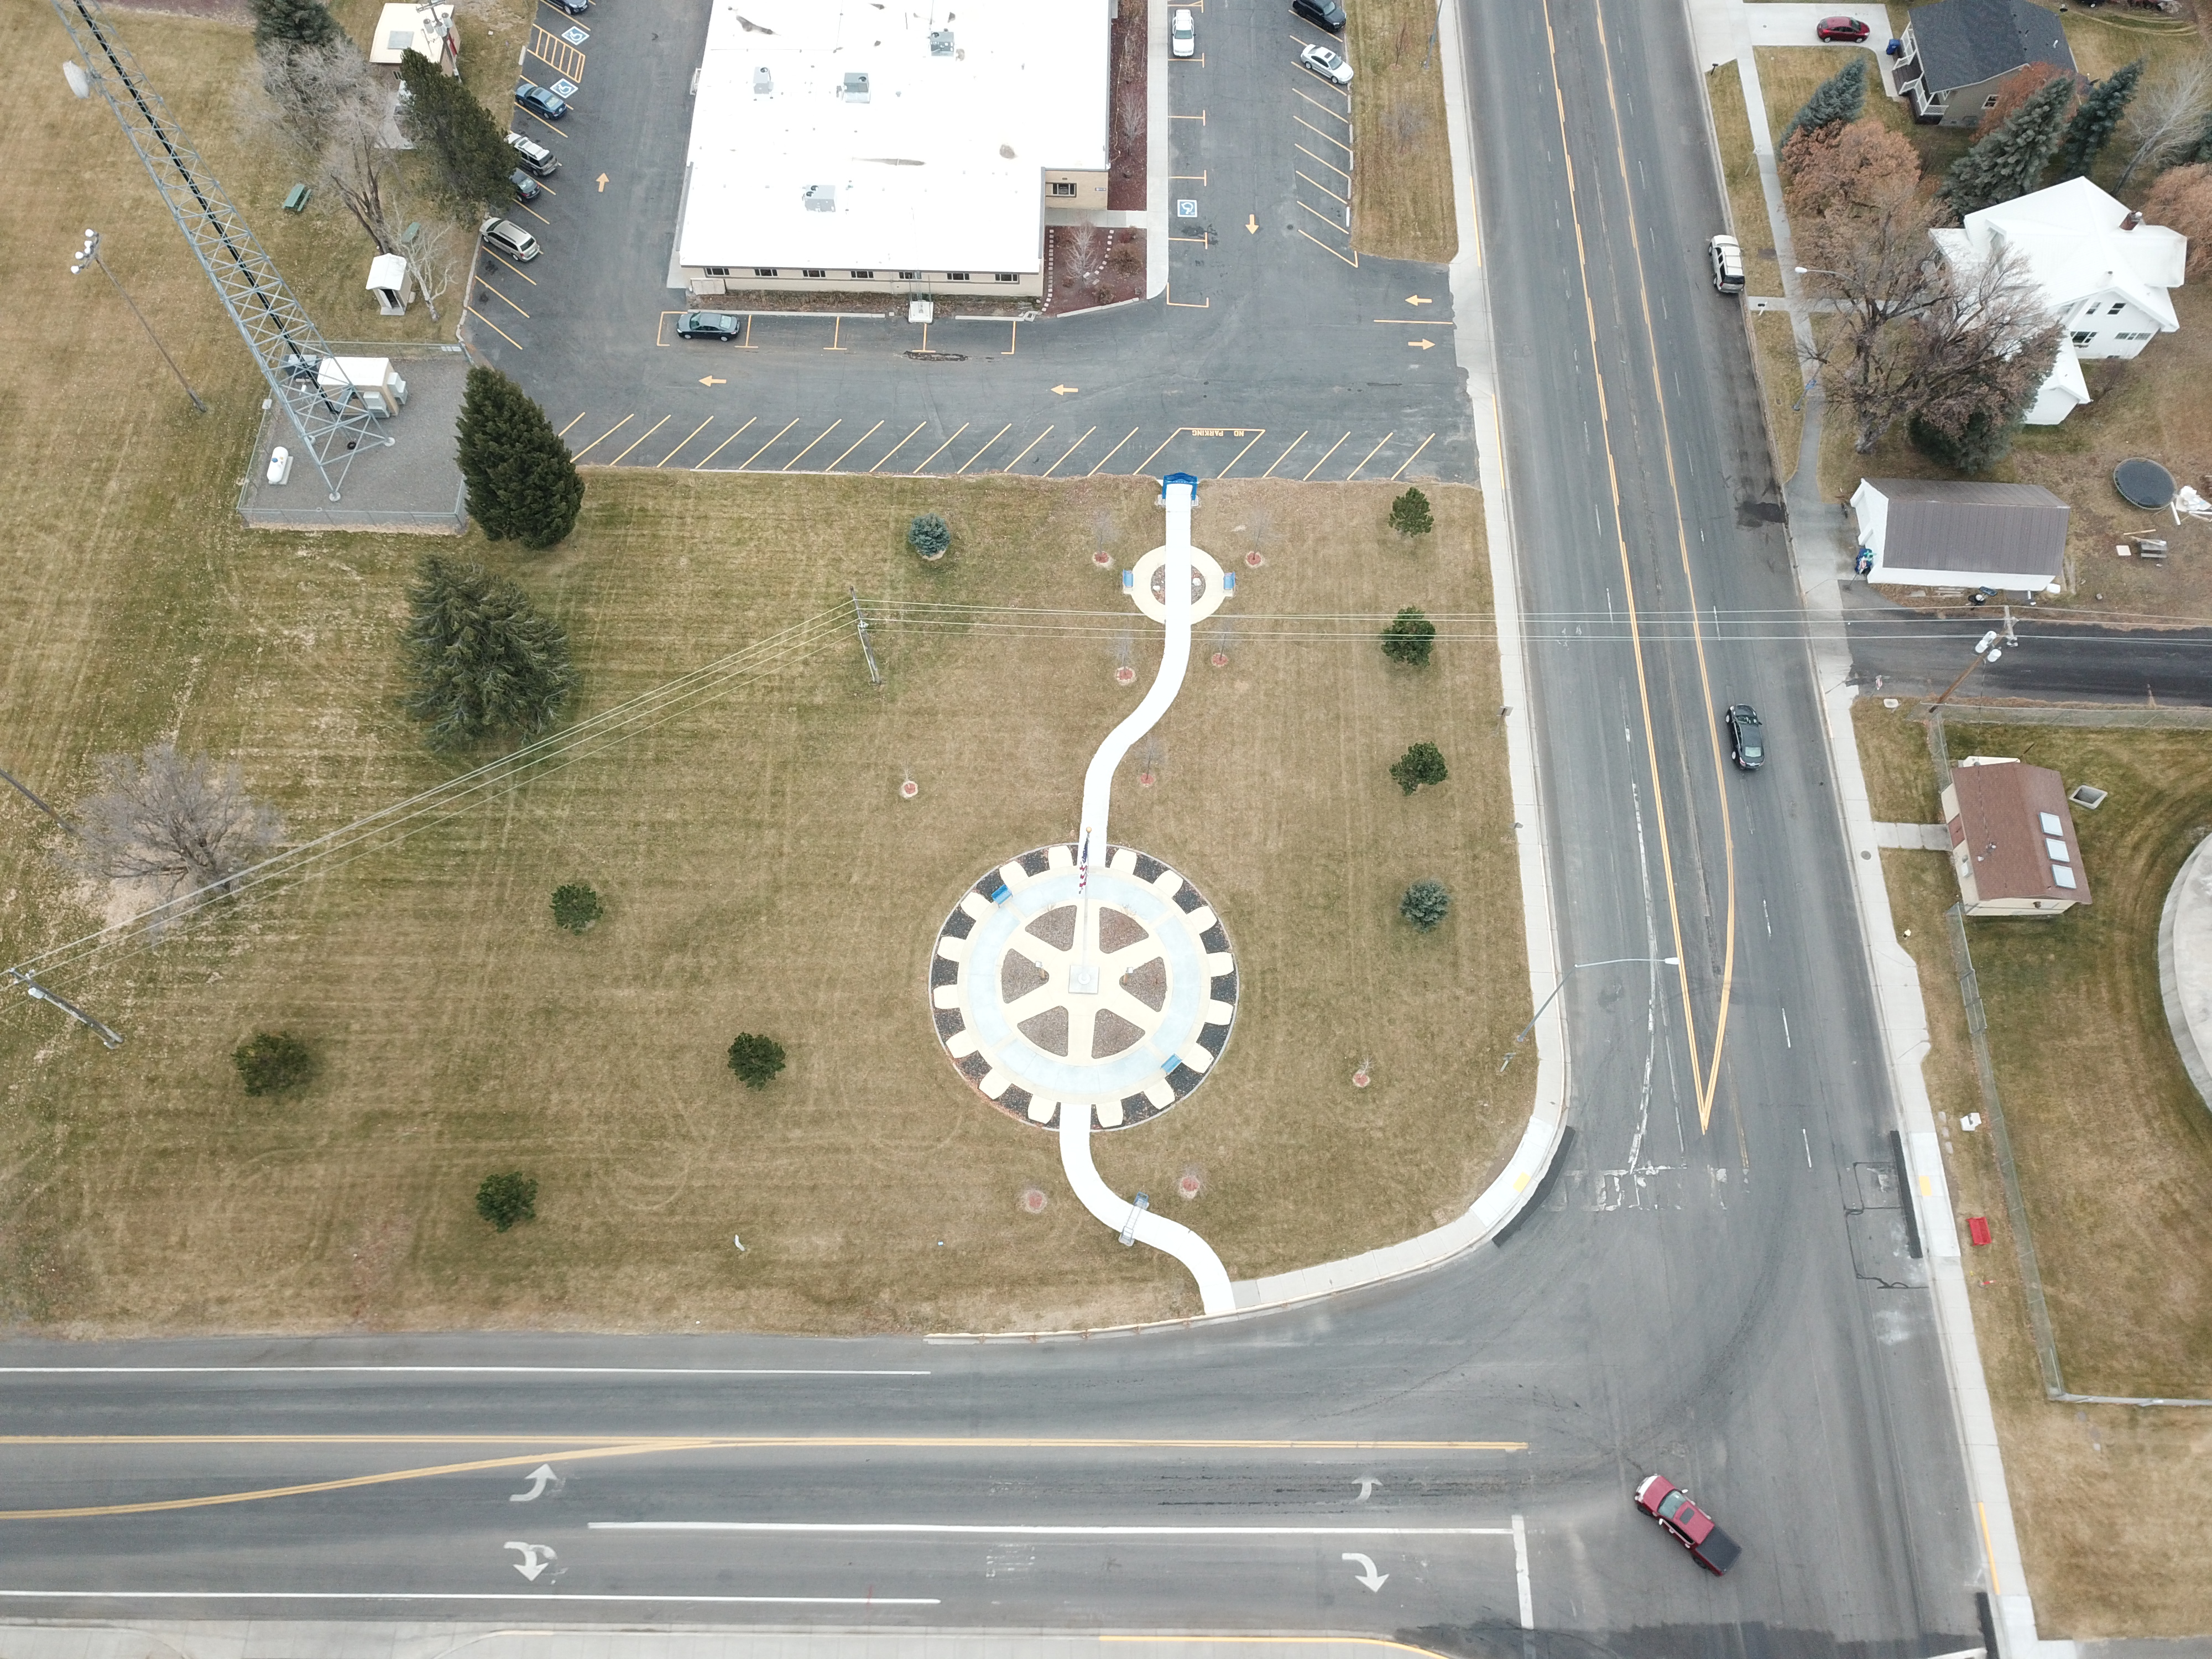 Airial view of Rotary Park